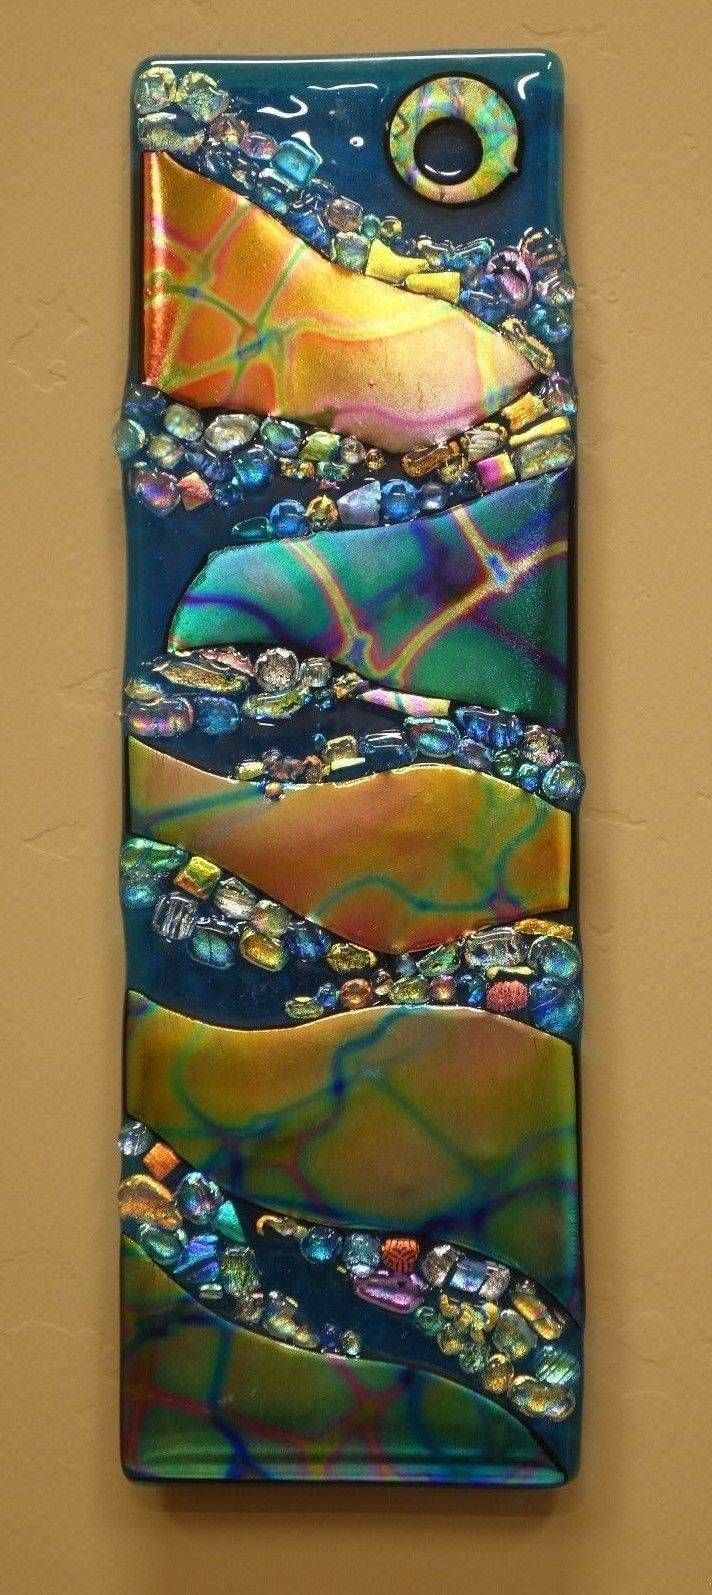 25+ Unique Glass Wall Art Ideas On Pinterest | Fused Glass Art Intended For Best And Newest Fused Glass Wall Art Hanging (View 12 of 25)